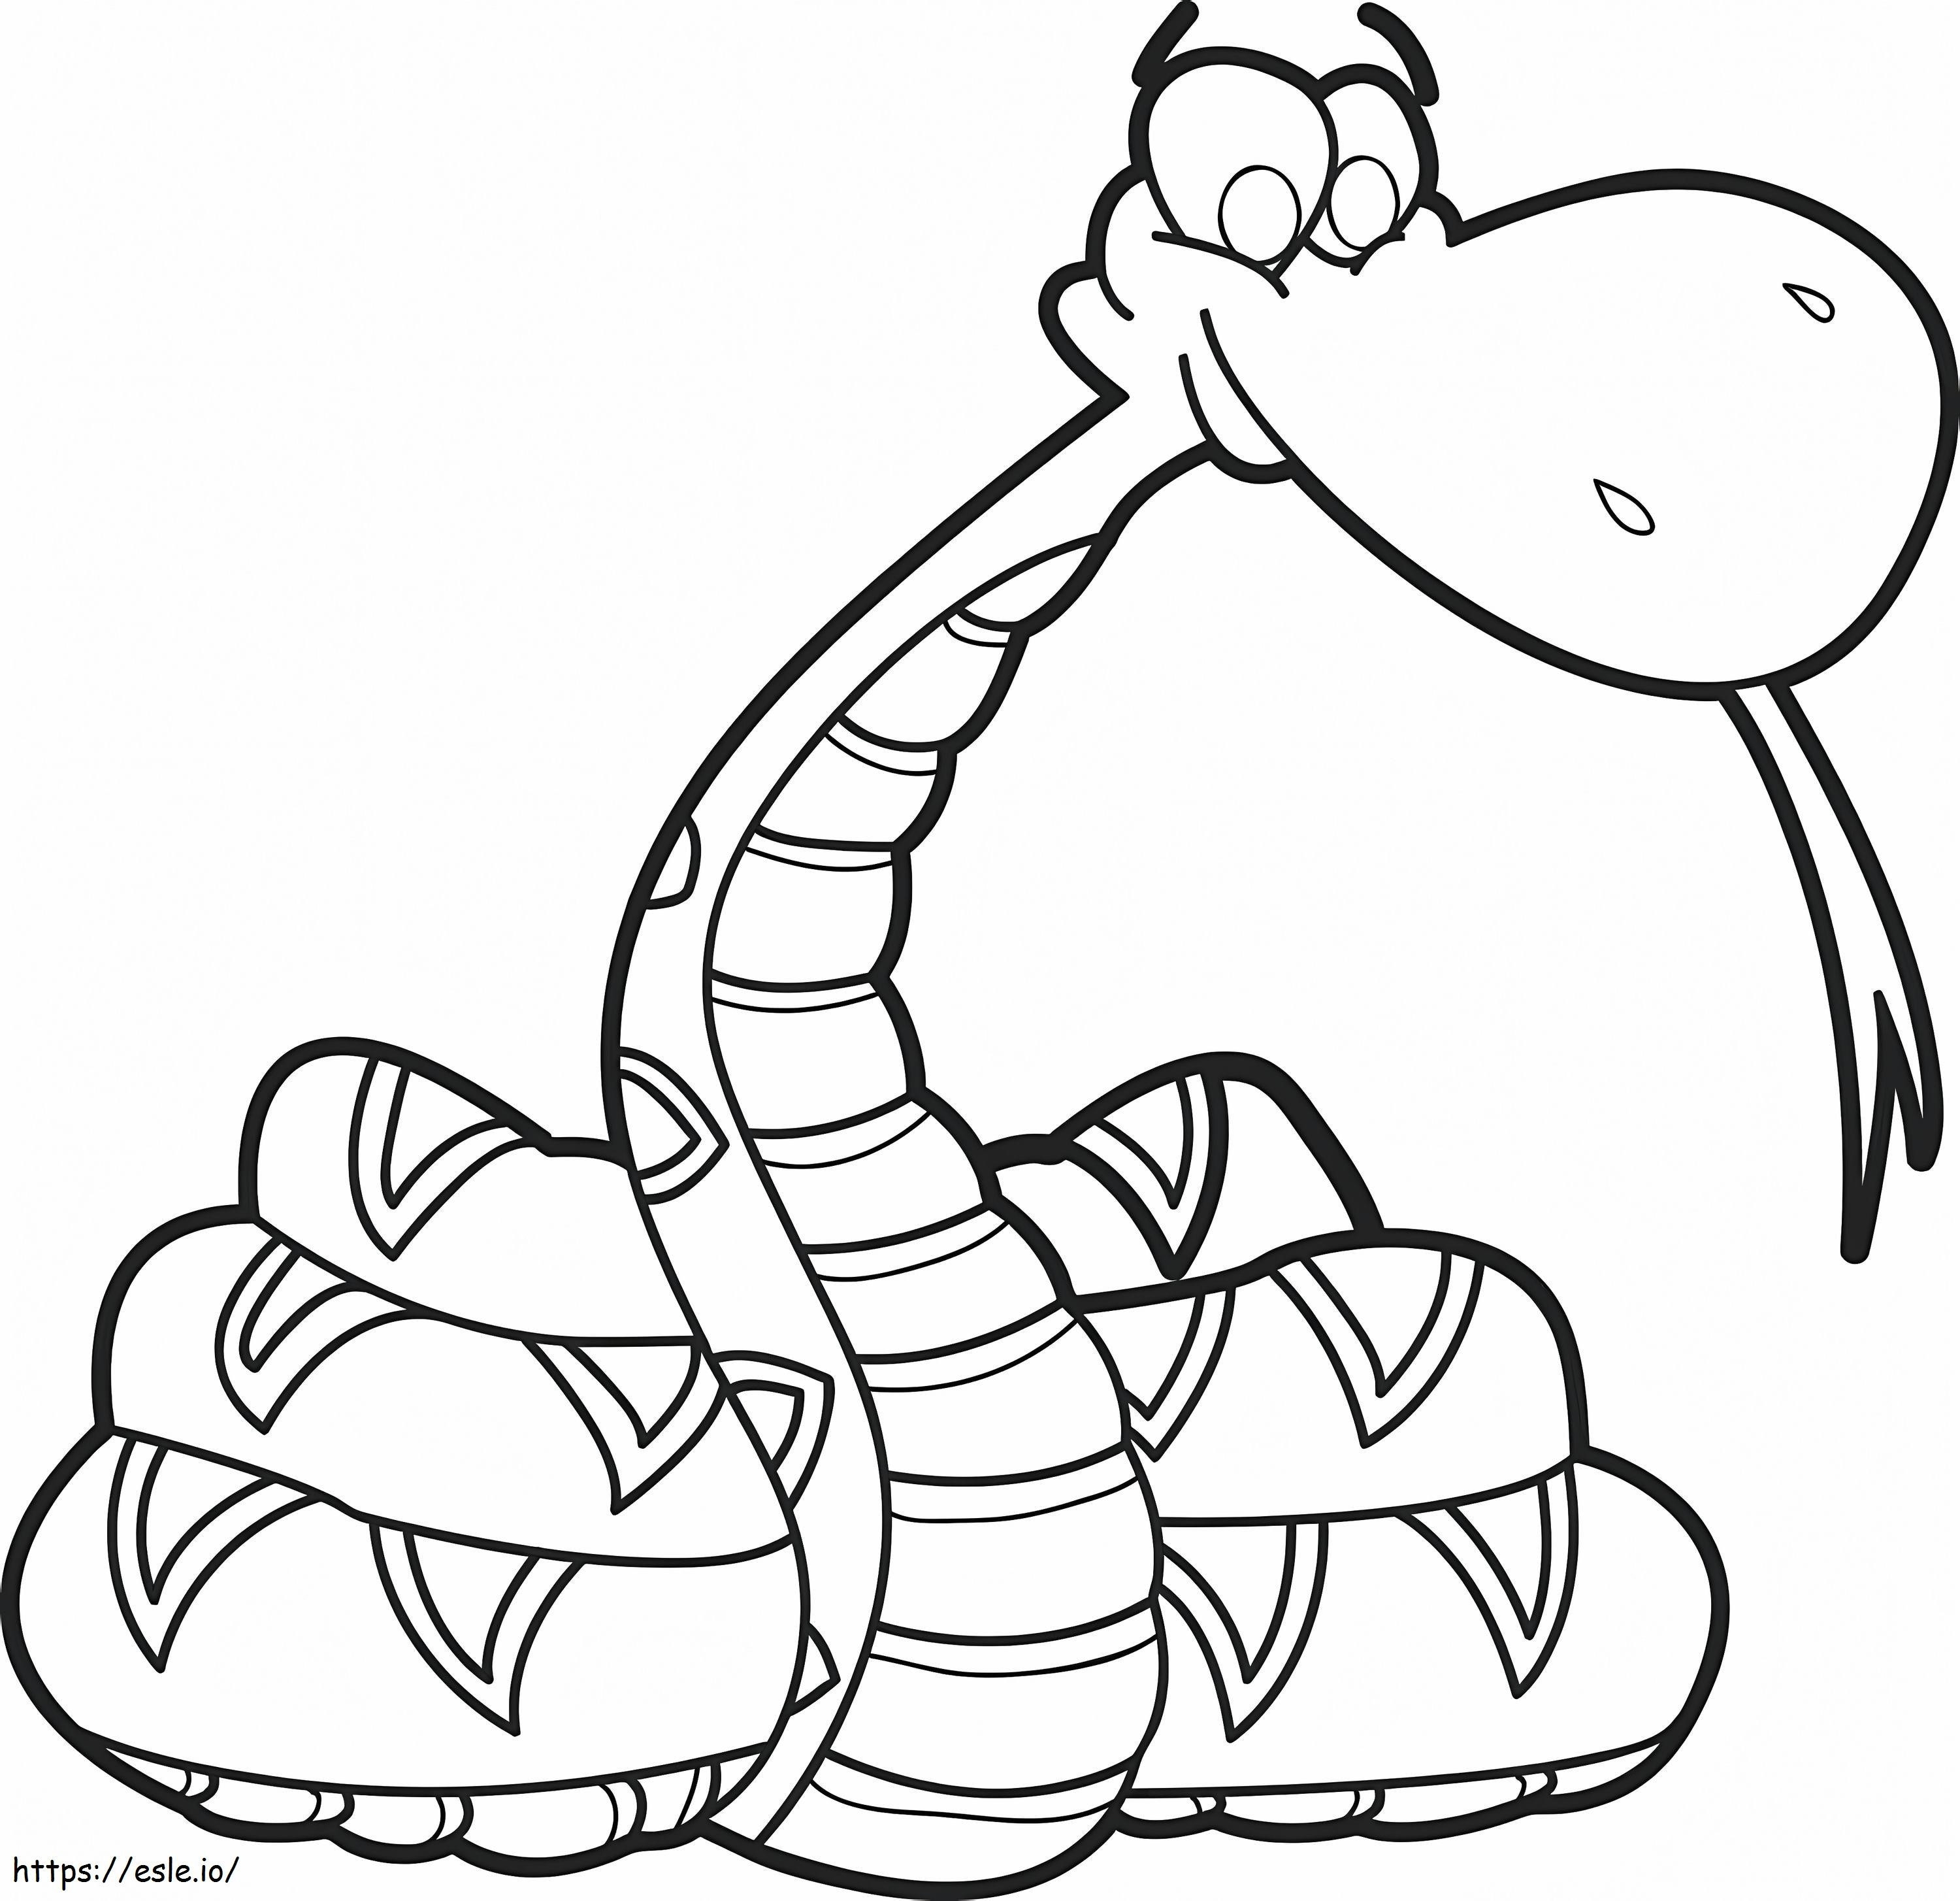 Funny Cartoon Snake coloring page